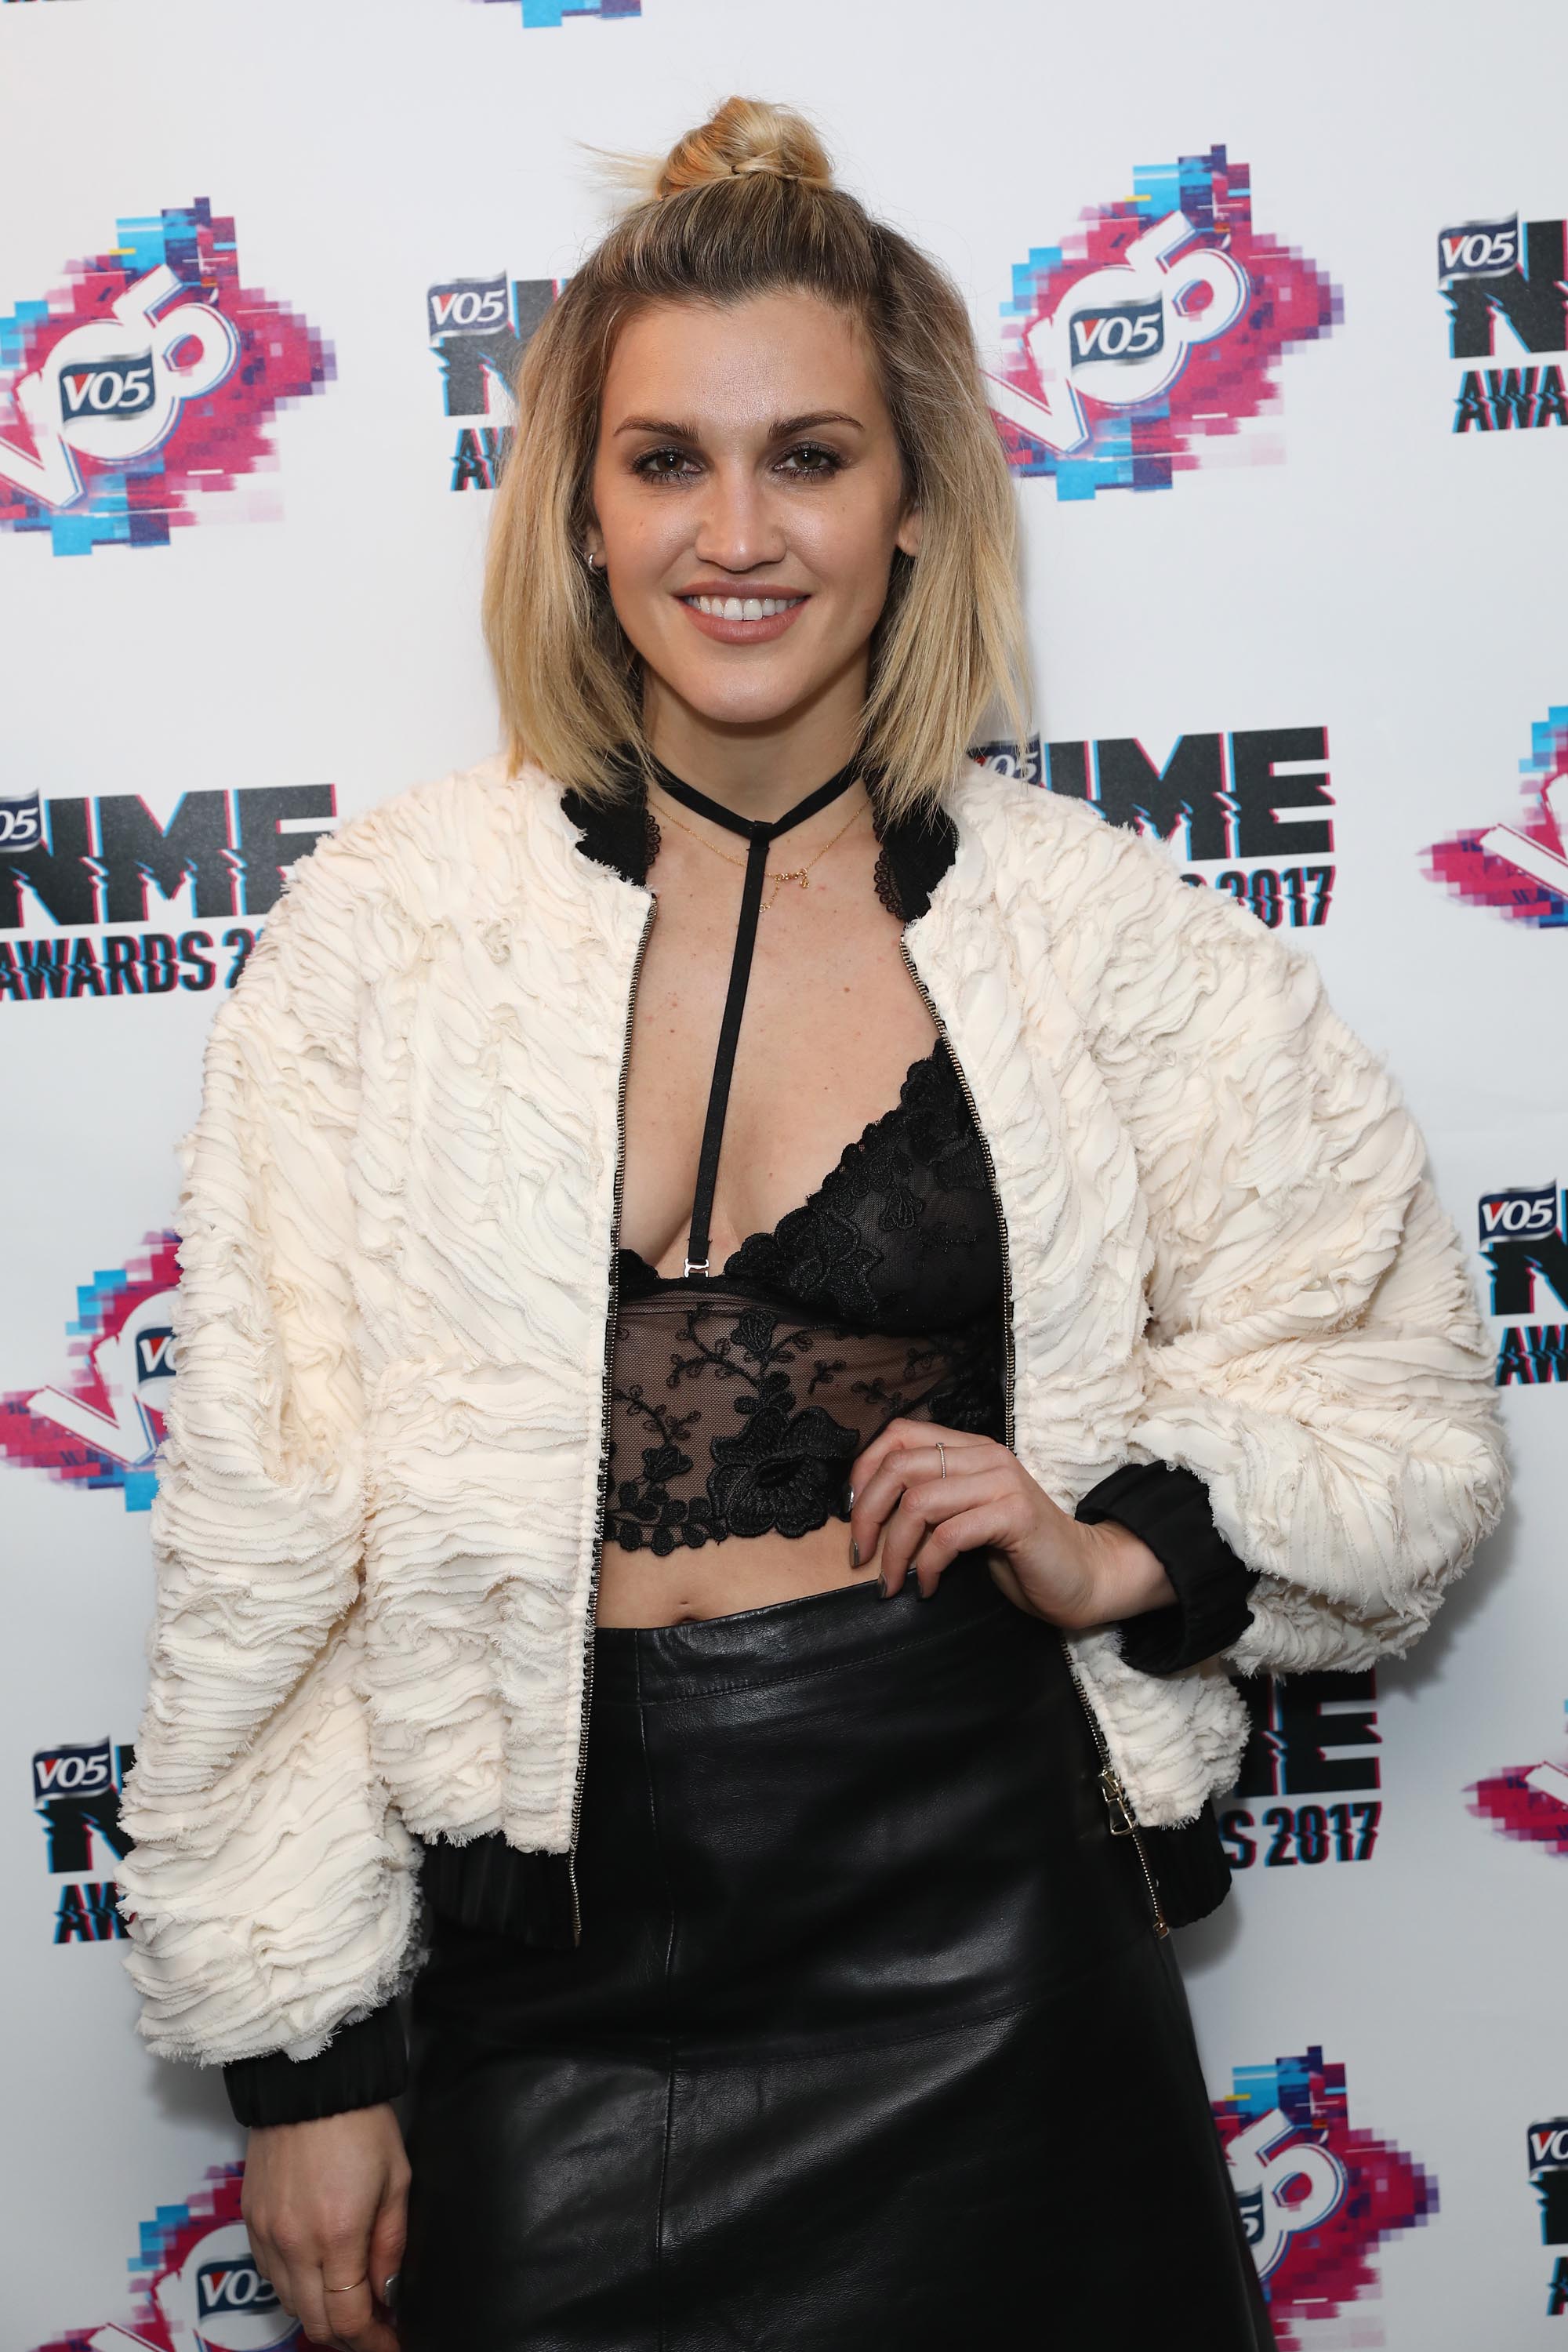 Ashley Roberts attends NME Awards